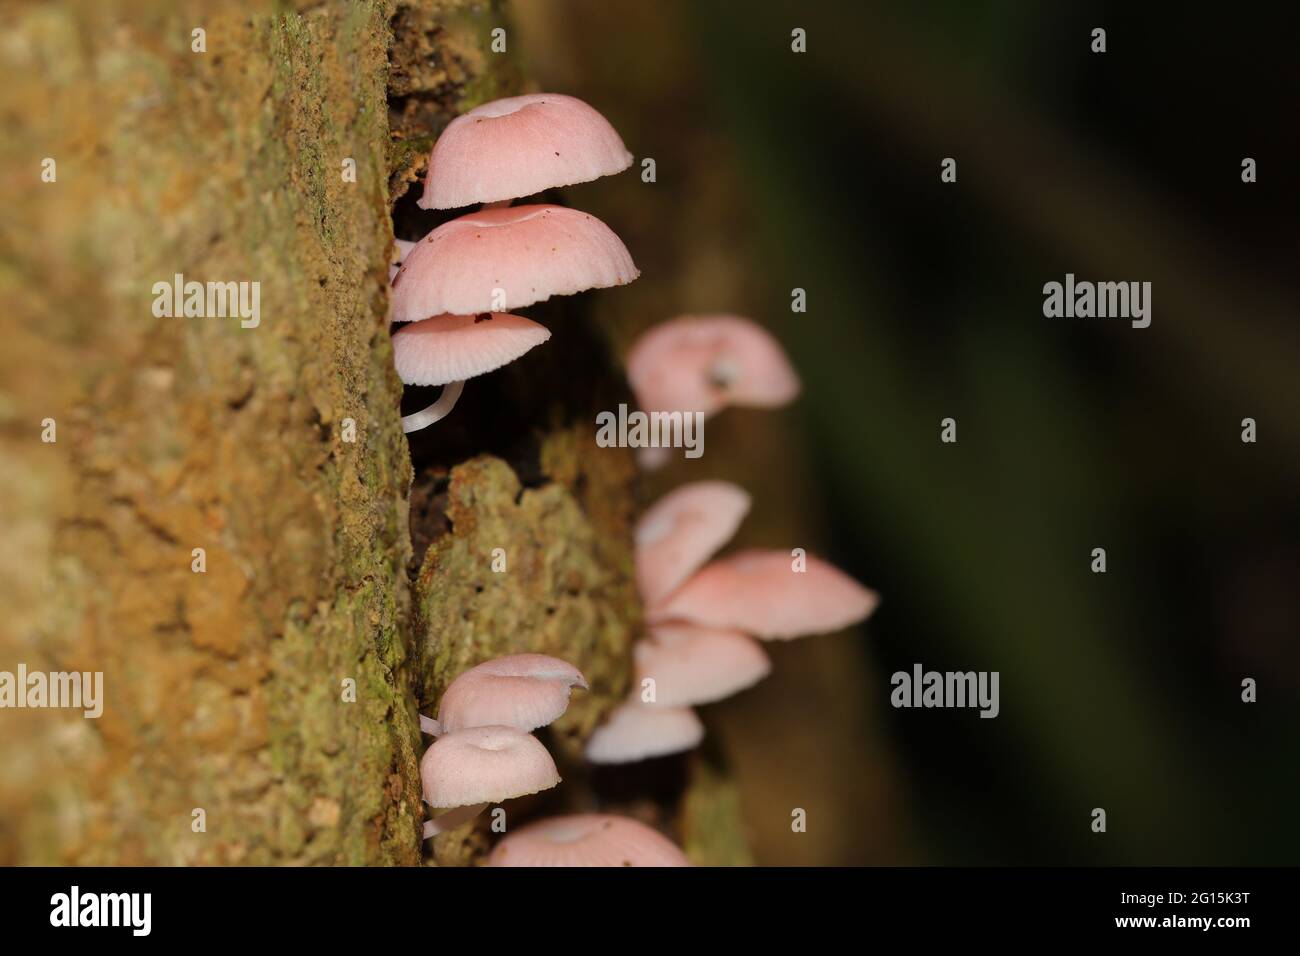 Clusters of pink mushrooms growing on a tree trunk in a rainforest Stock Photo